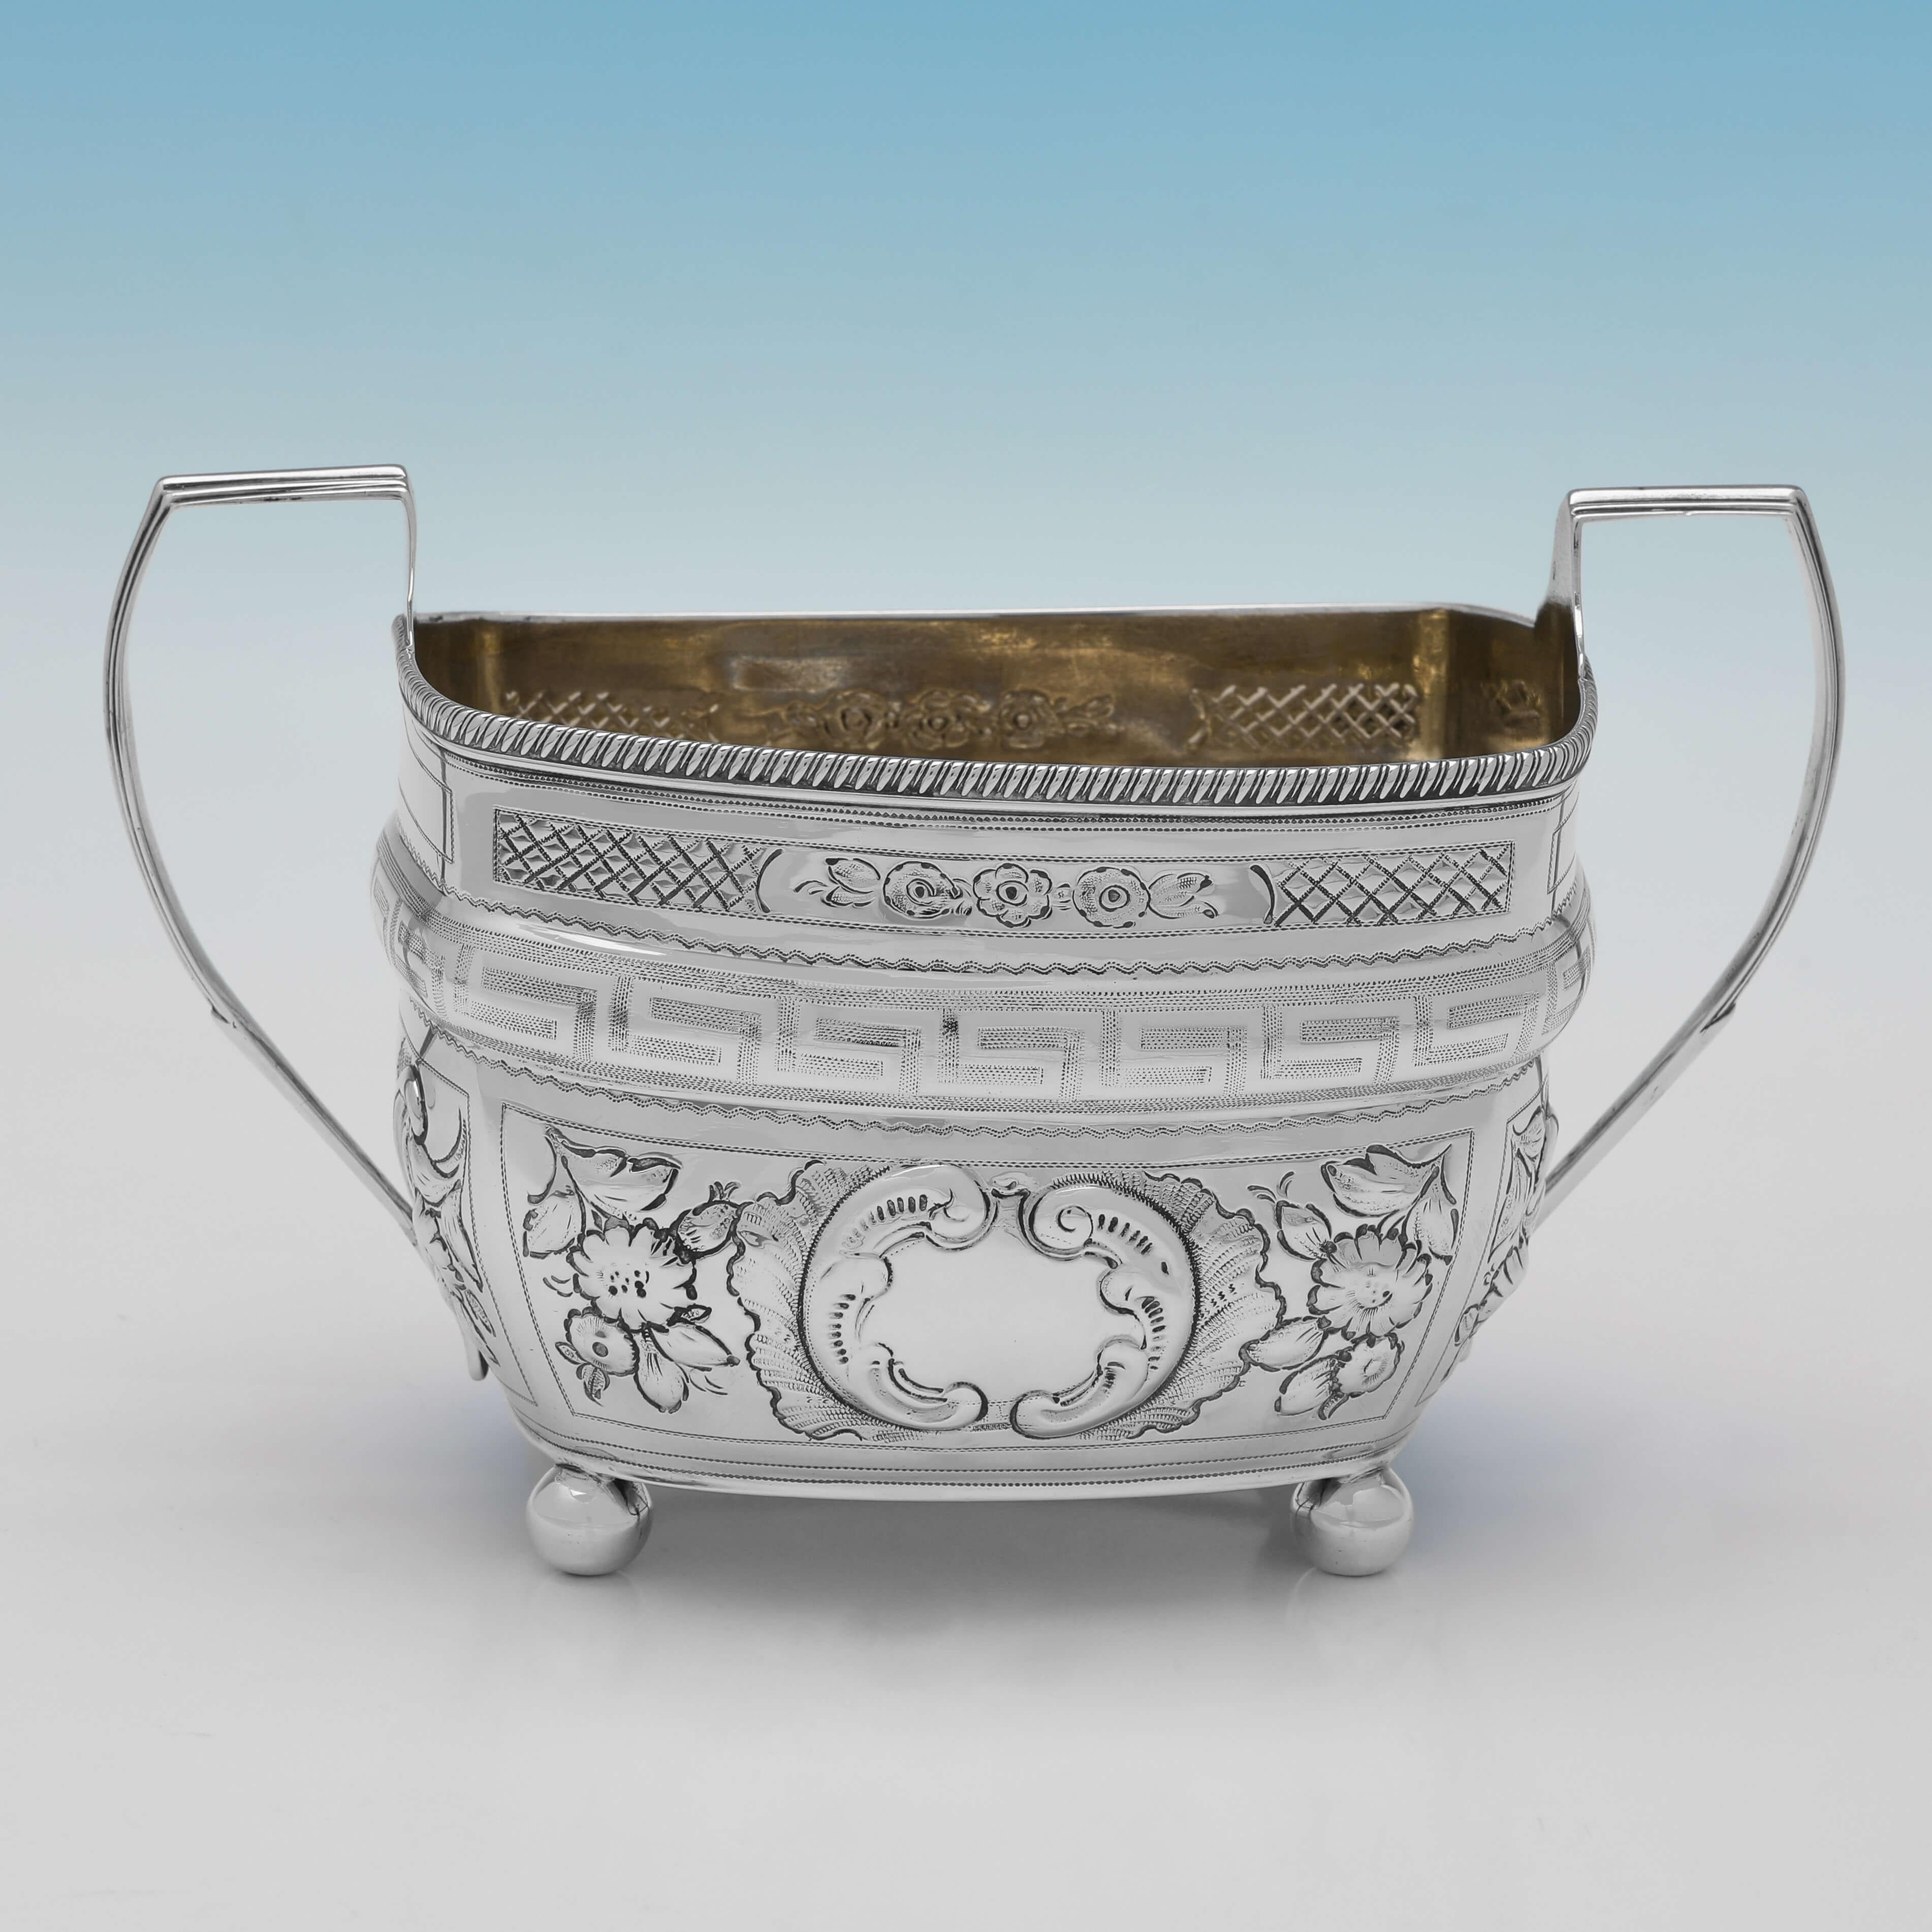 Hallmarked in London in 1804 and 1805 by Crispin Fuller, this George III, Antique Sterling Silver Sugar and Cream Set, have been later chased. 

The sugar bowl measures 4.25